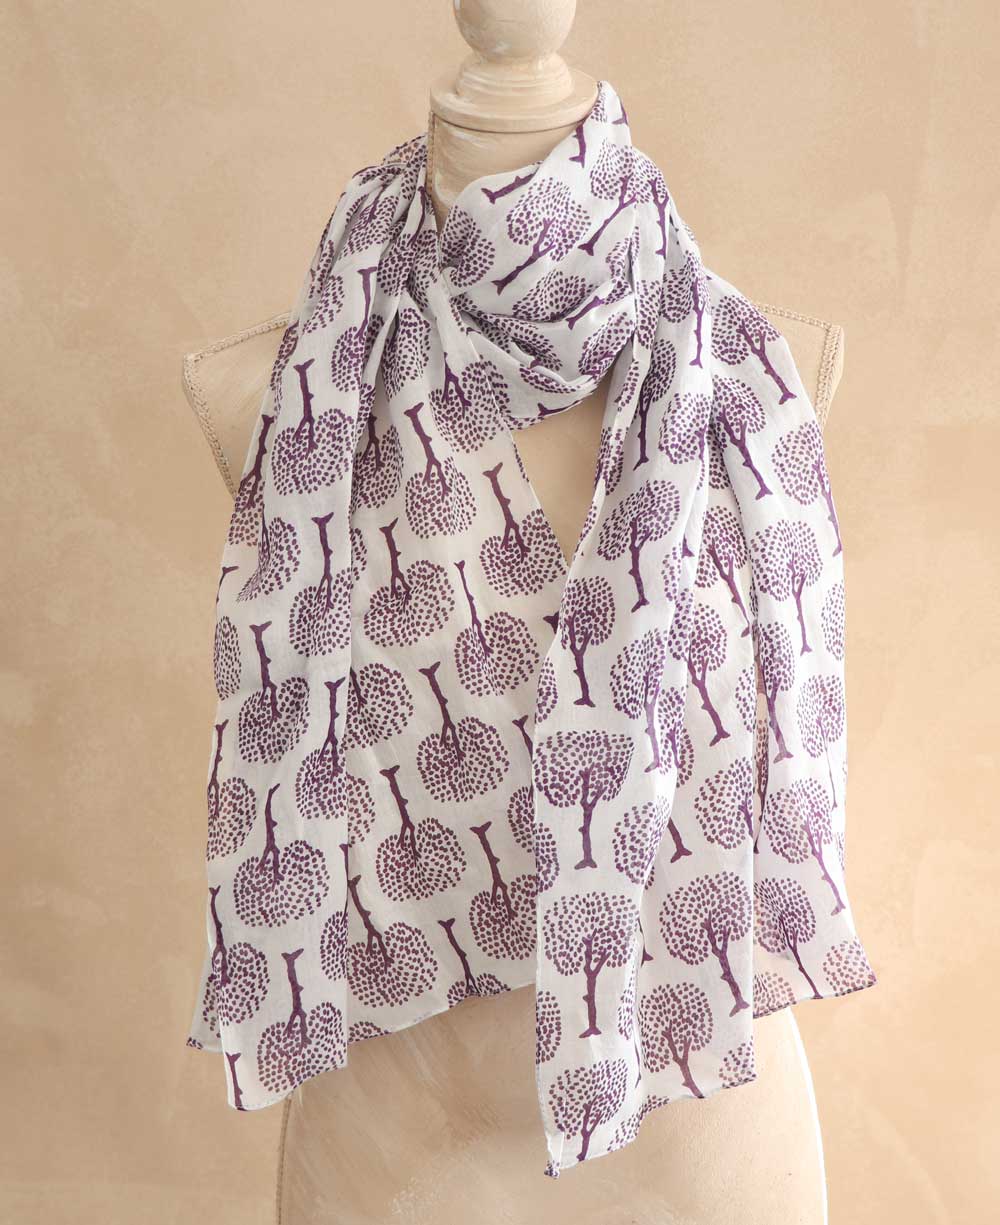 Fairtrade Tree of Life Voile Scarf - Scarves